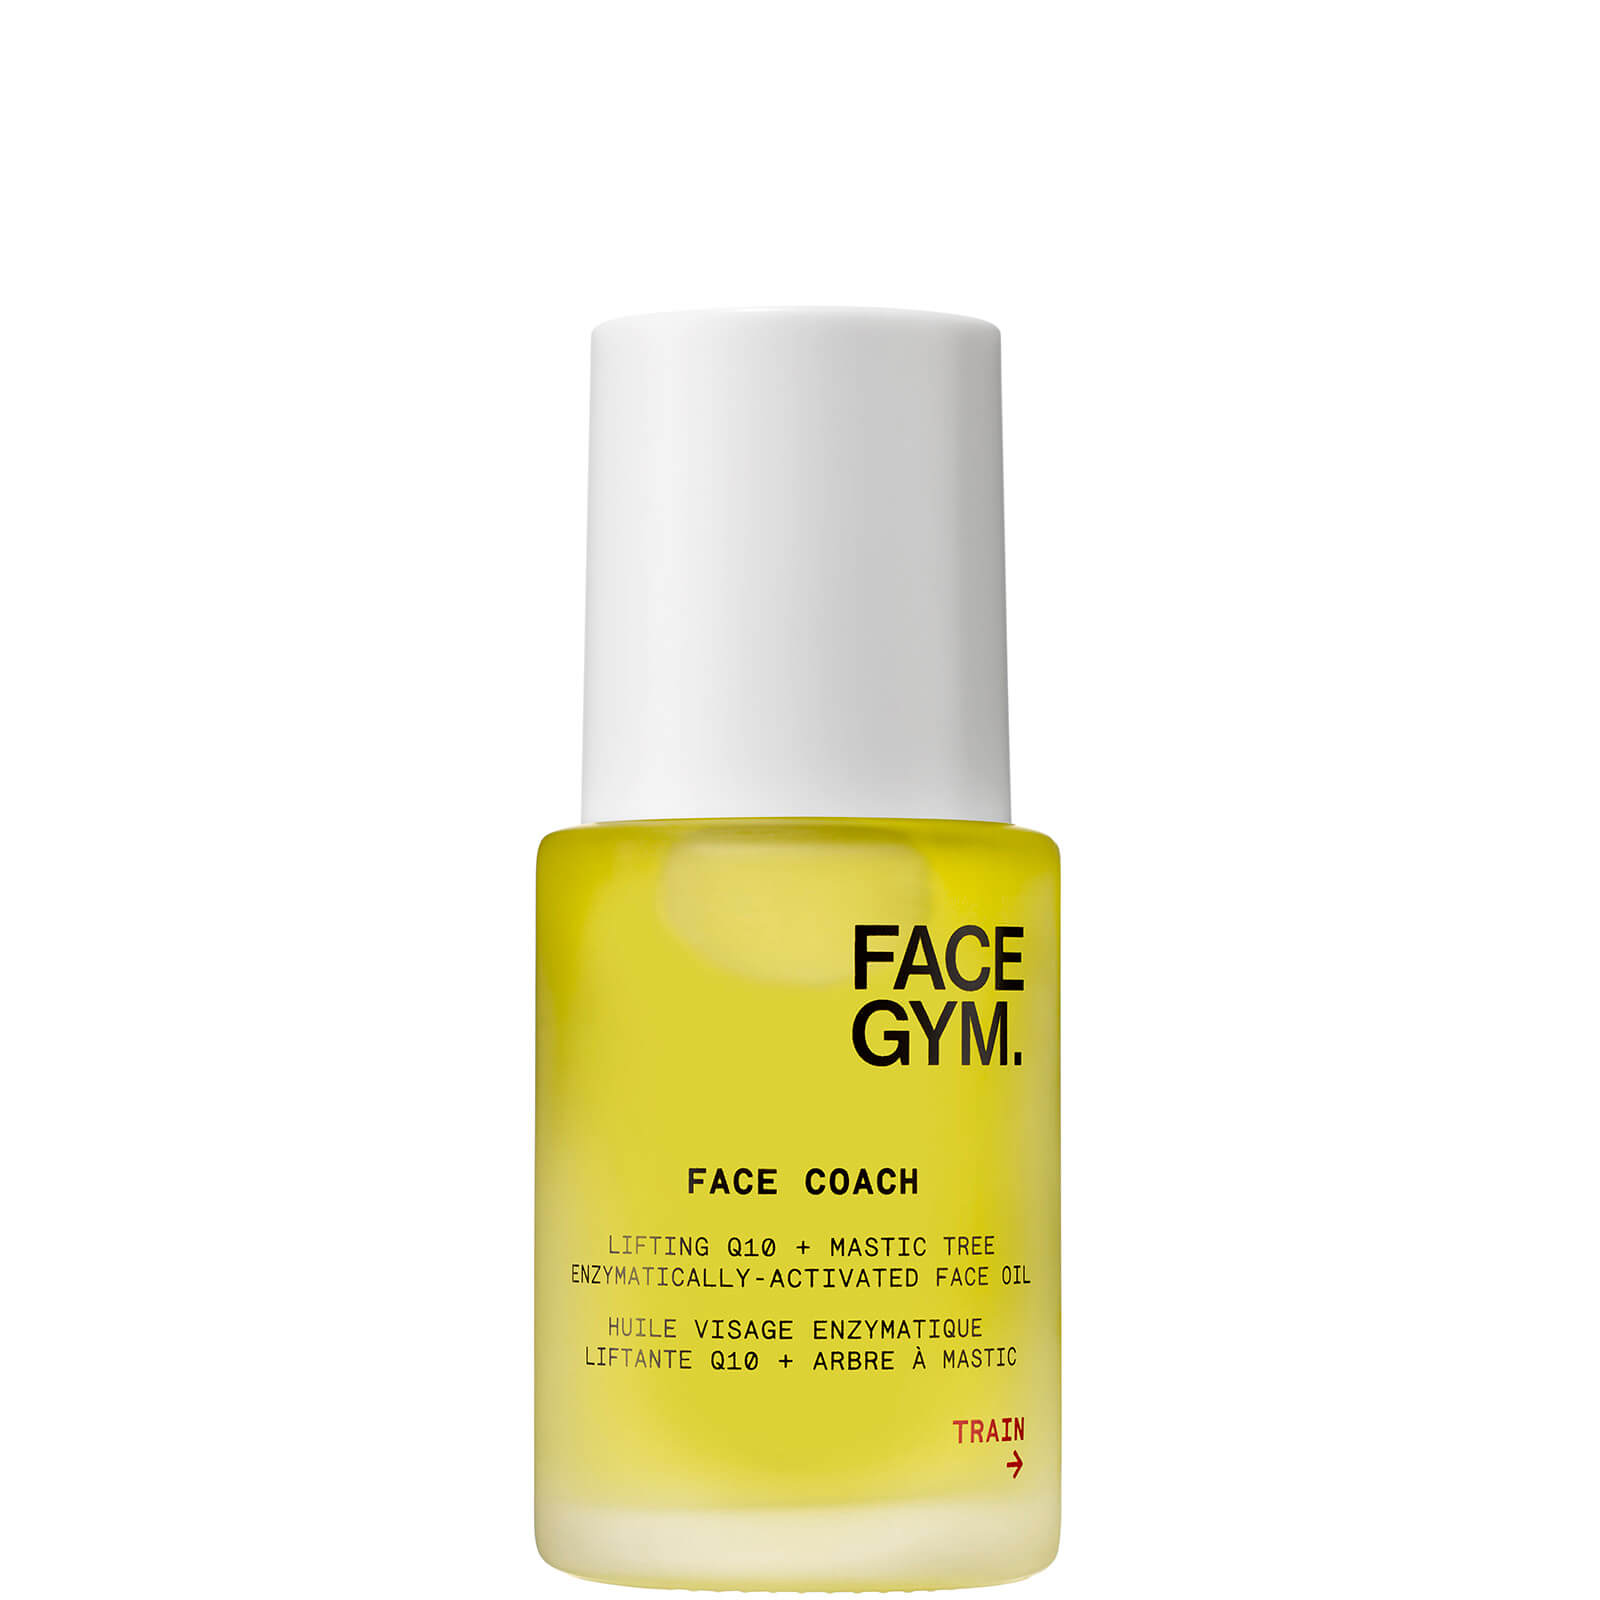 Image of FaceGym Face Coach Lifting Q10 and Mastic Tree Enzymatically-activated Face Oil (Various Sizes) - 30ml